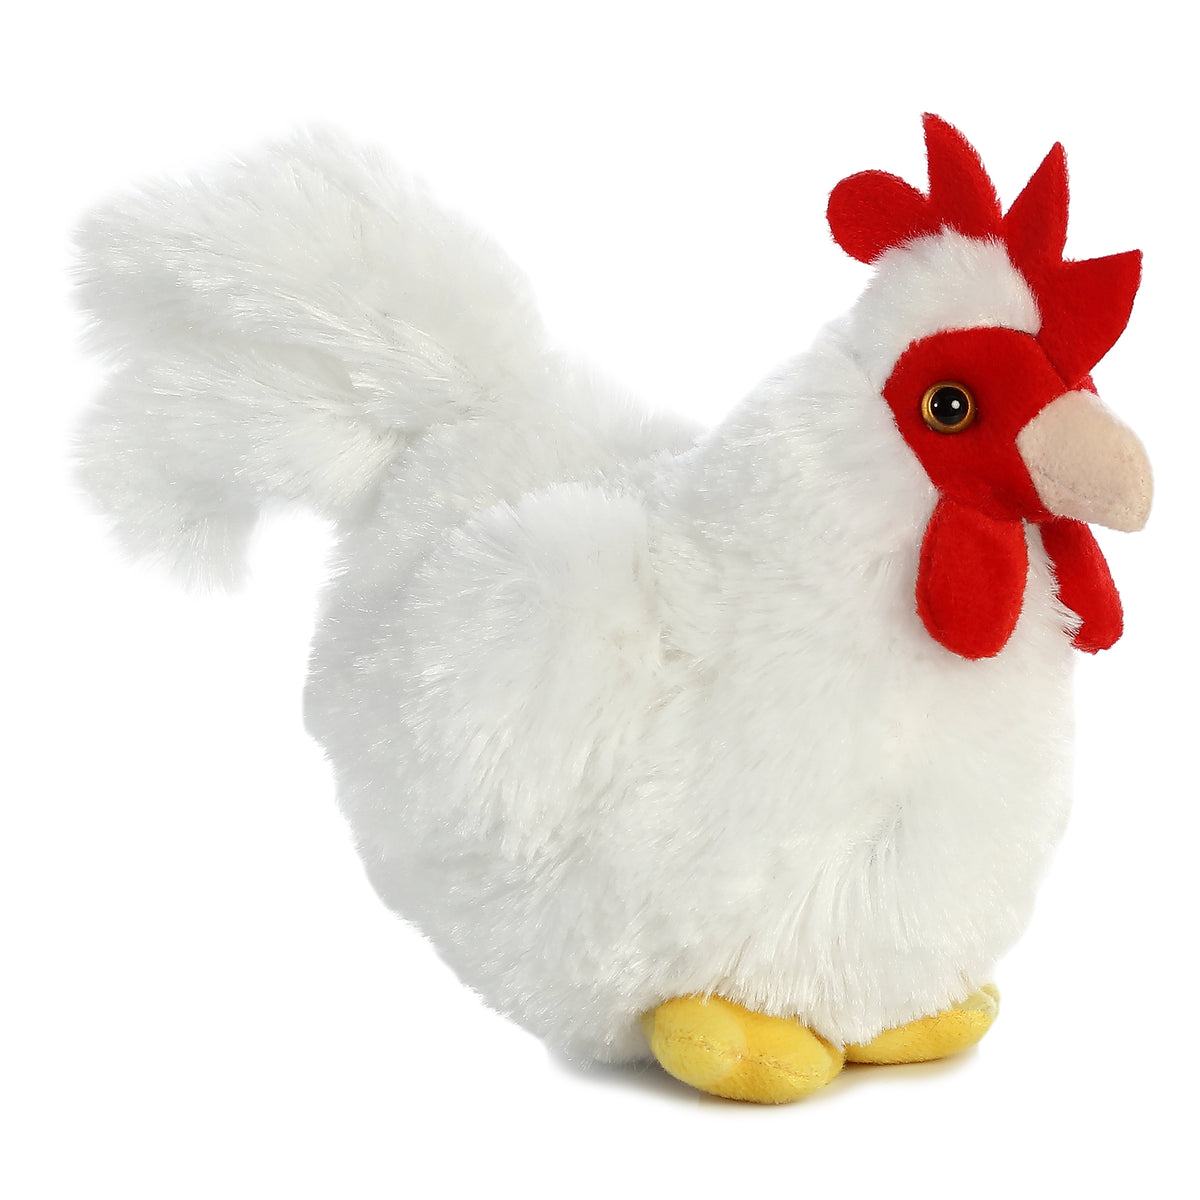 Fluffy Chicken plush from Aurora's Mini Flopsie collection, soft white fur with red features resembling a real chicken!